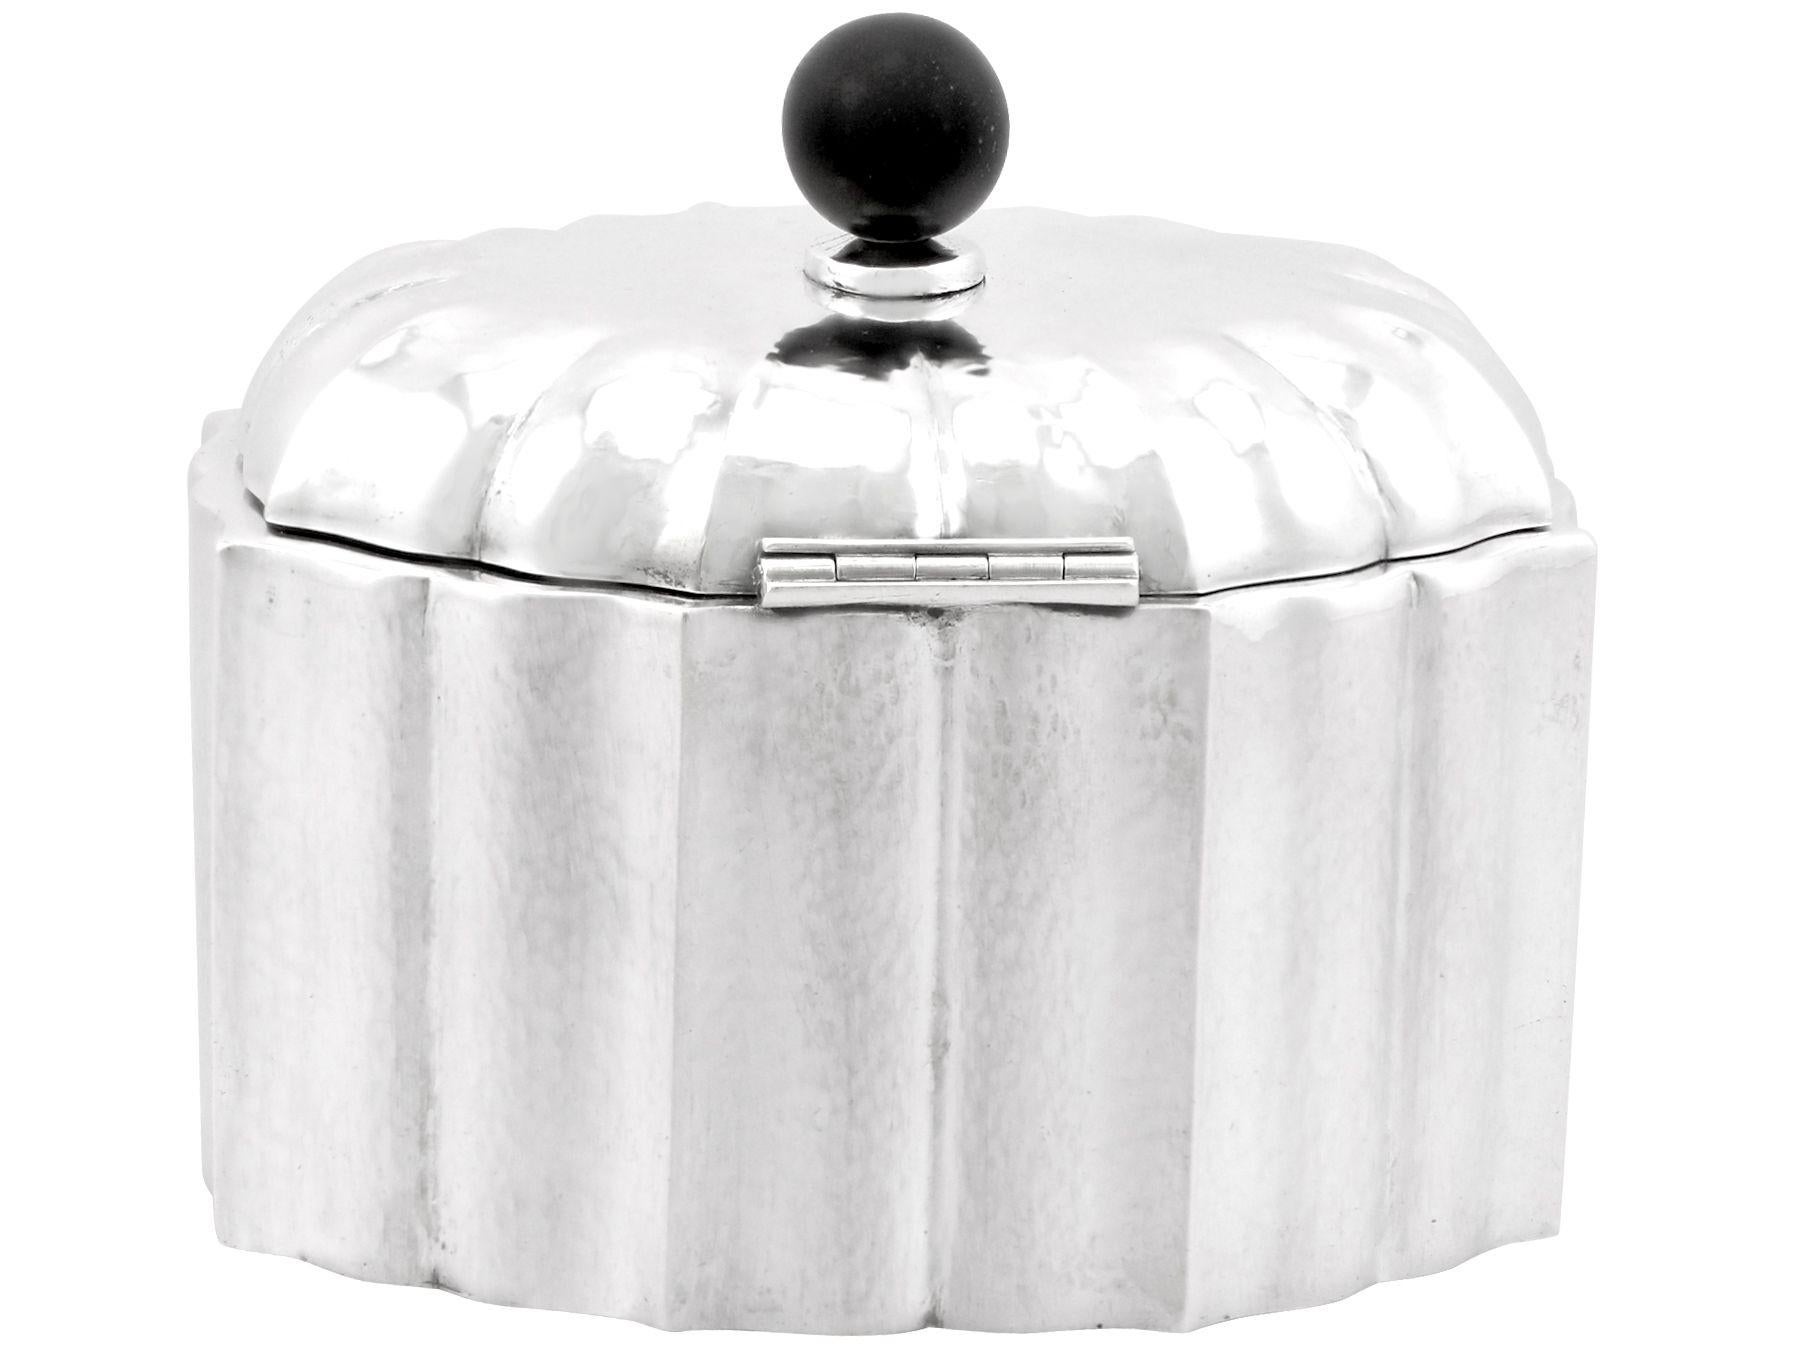 Antique Austrian Silver Tea Caddy, circa 1955 In Excellent Condition For Sale In Jesmond, Newcastle Upon Tyne